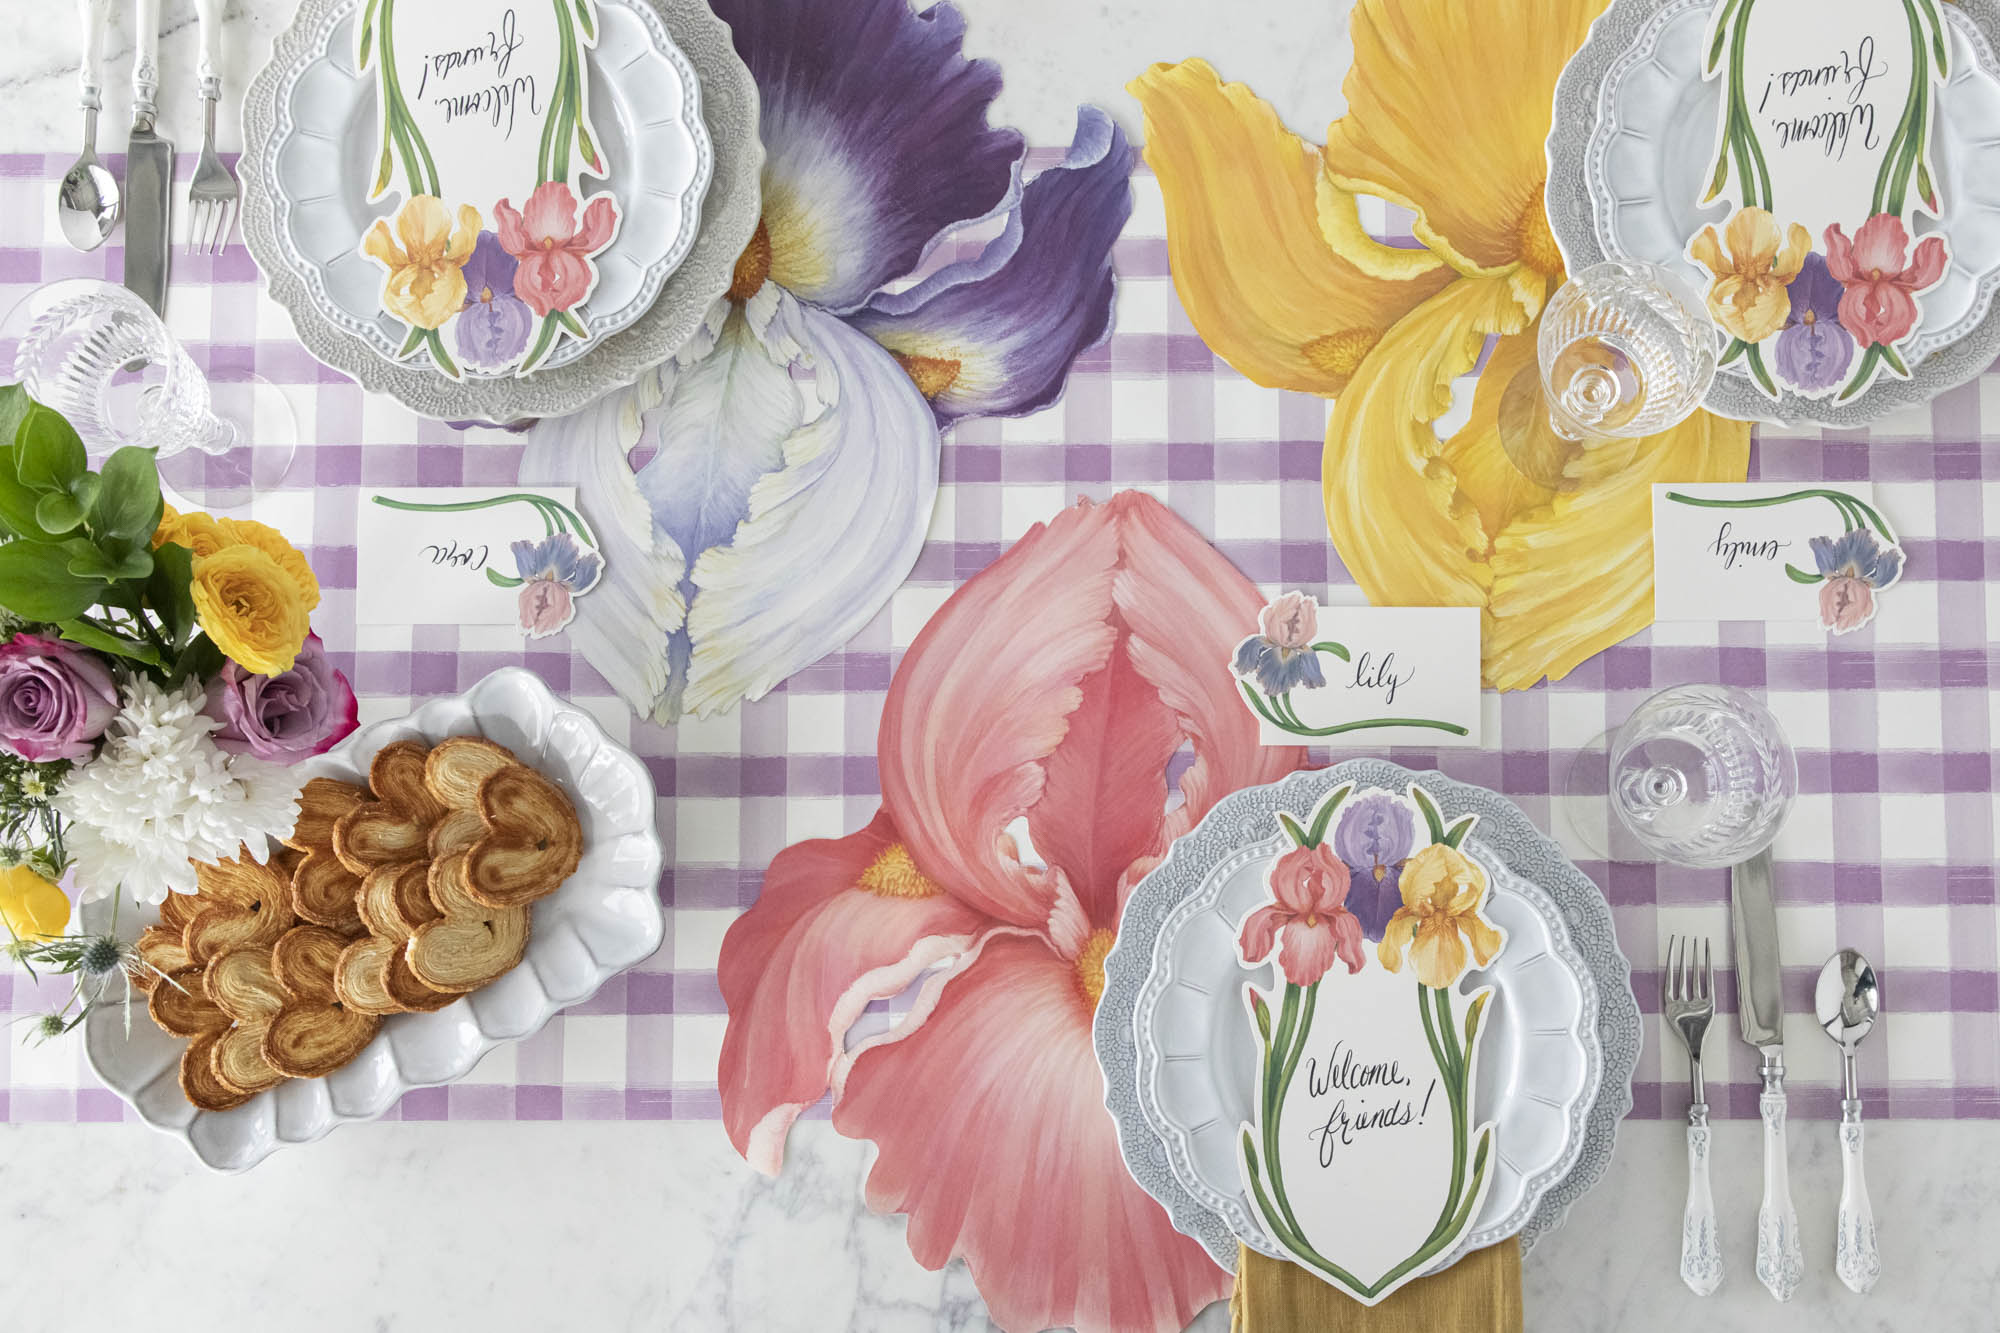 Top-down view of an elegant floral table setting featuring an Iris Table Card with &quot;Welcome, friends!&quot; written on it in beautiful script resting on each plate.